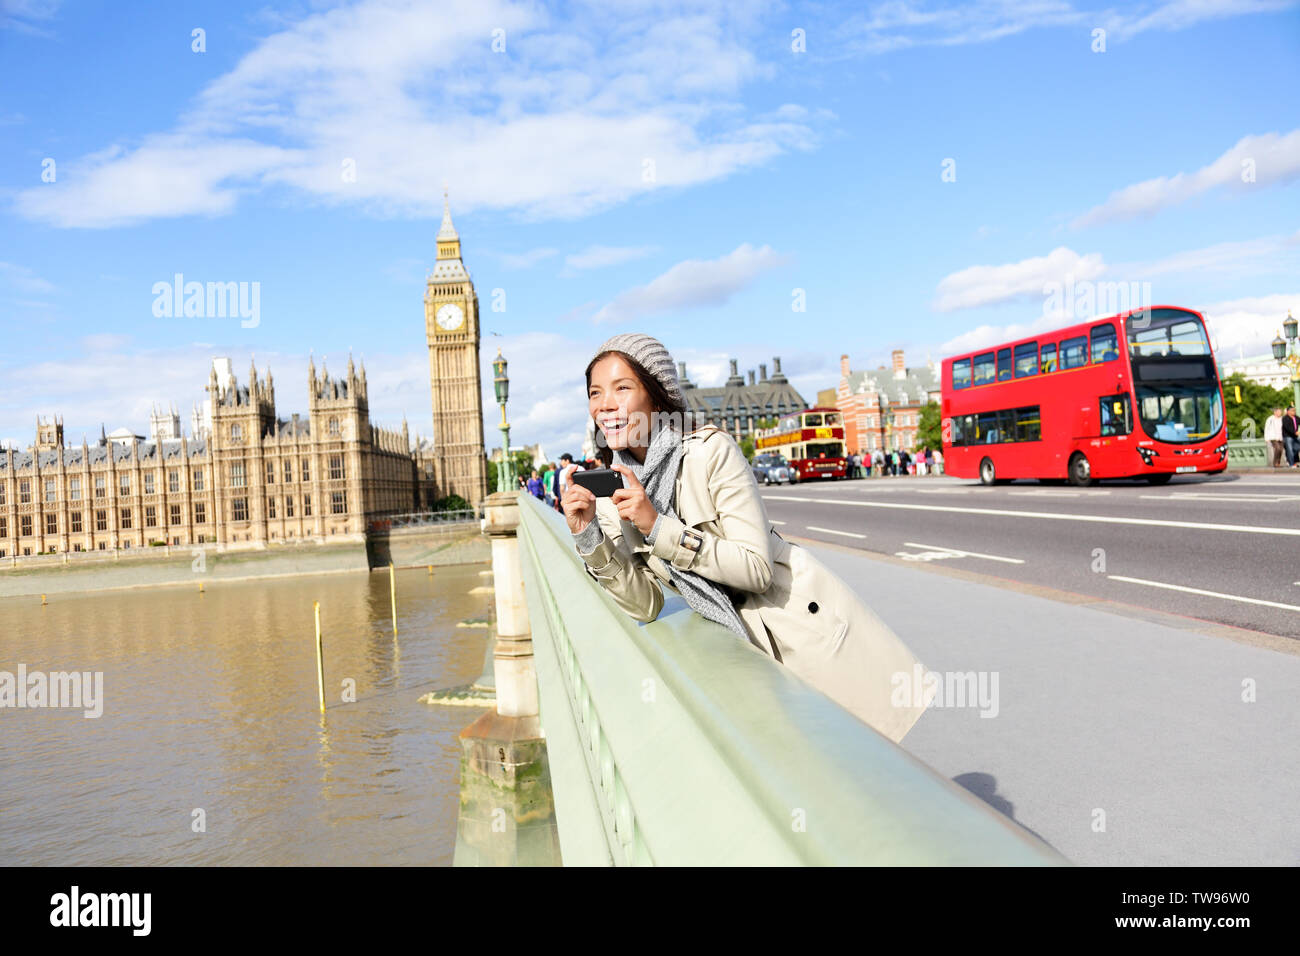 London travel woman tourist by Big Ben and red double decker bus. Girl taking photo on Westminster Bridge with smart phone camera over River Thames, London, England, Great Britain, UK. Stock Photo